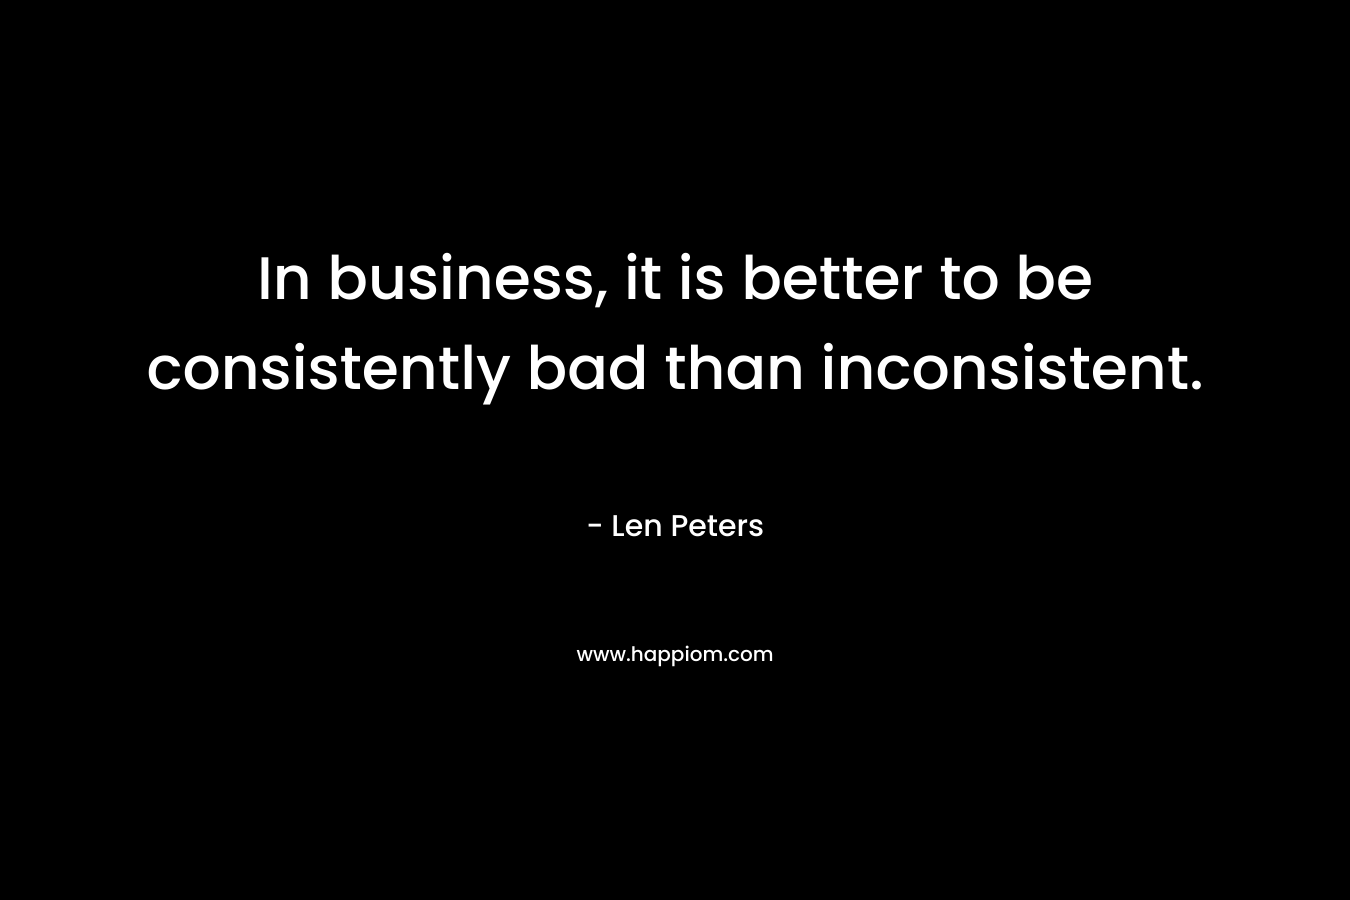 In business, it is better to be consistently bad than inconsistent. – Len Peters